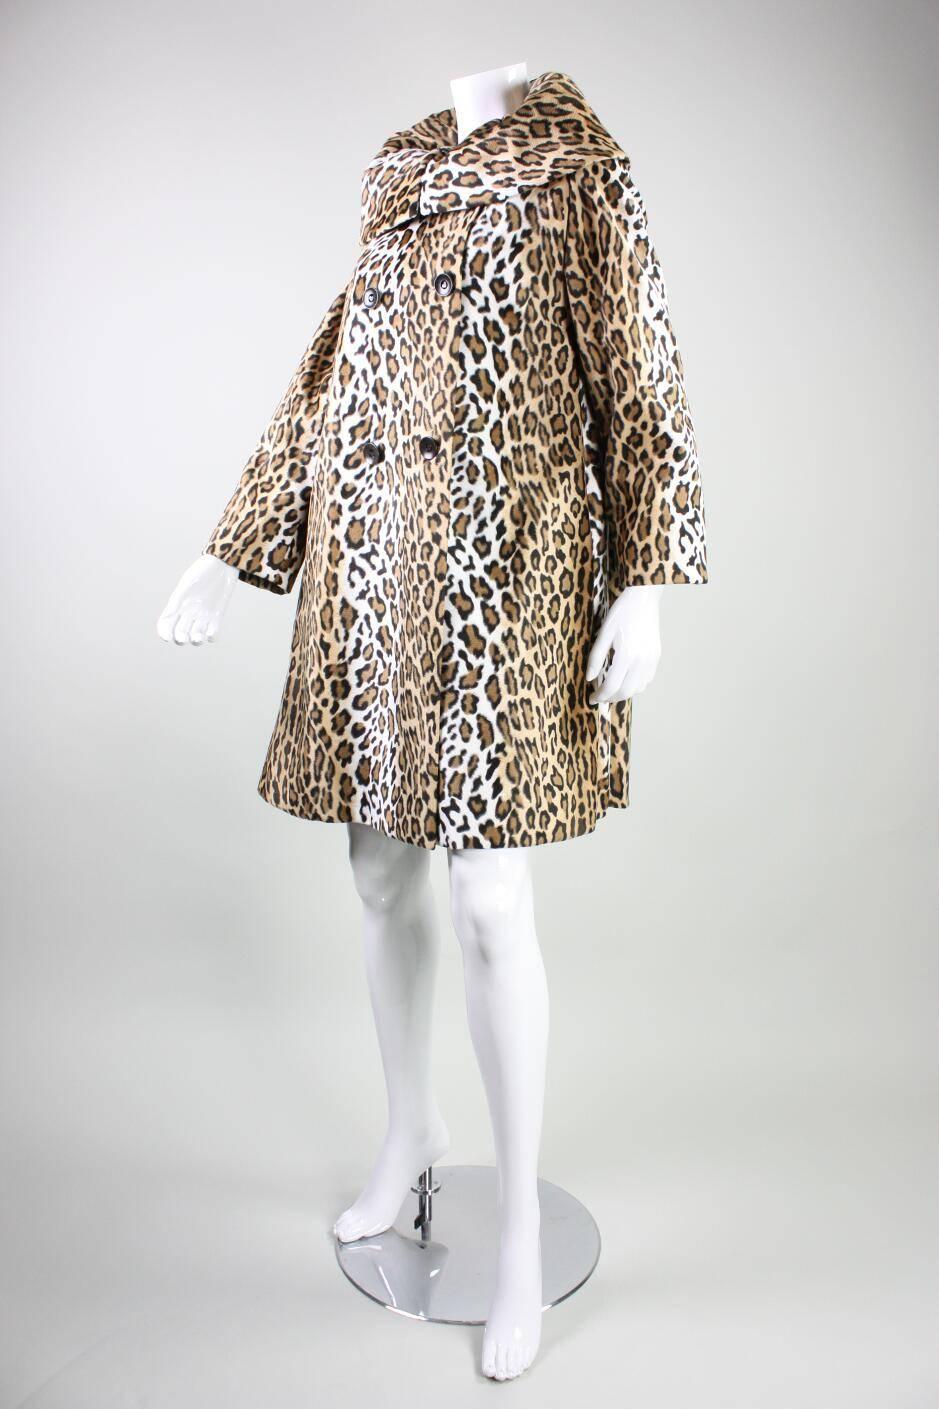 Vintage coat from Moschino likely dates to the 1990's and features a leopard print in neutral tones. Wide portrait collar is shaped with multiple darts. Double-breasted with round buttons that have heart-shaped cutouts. A-line silhouette with